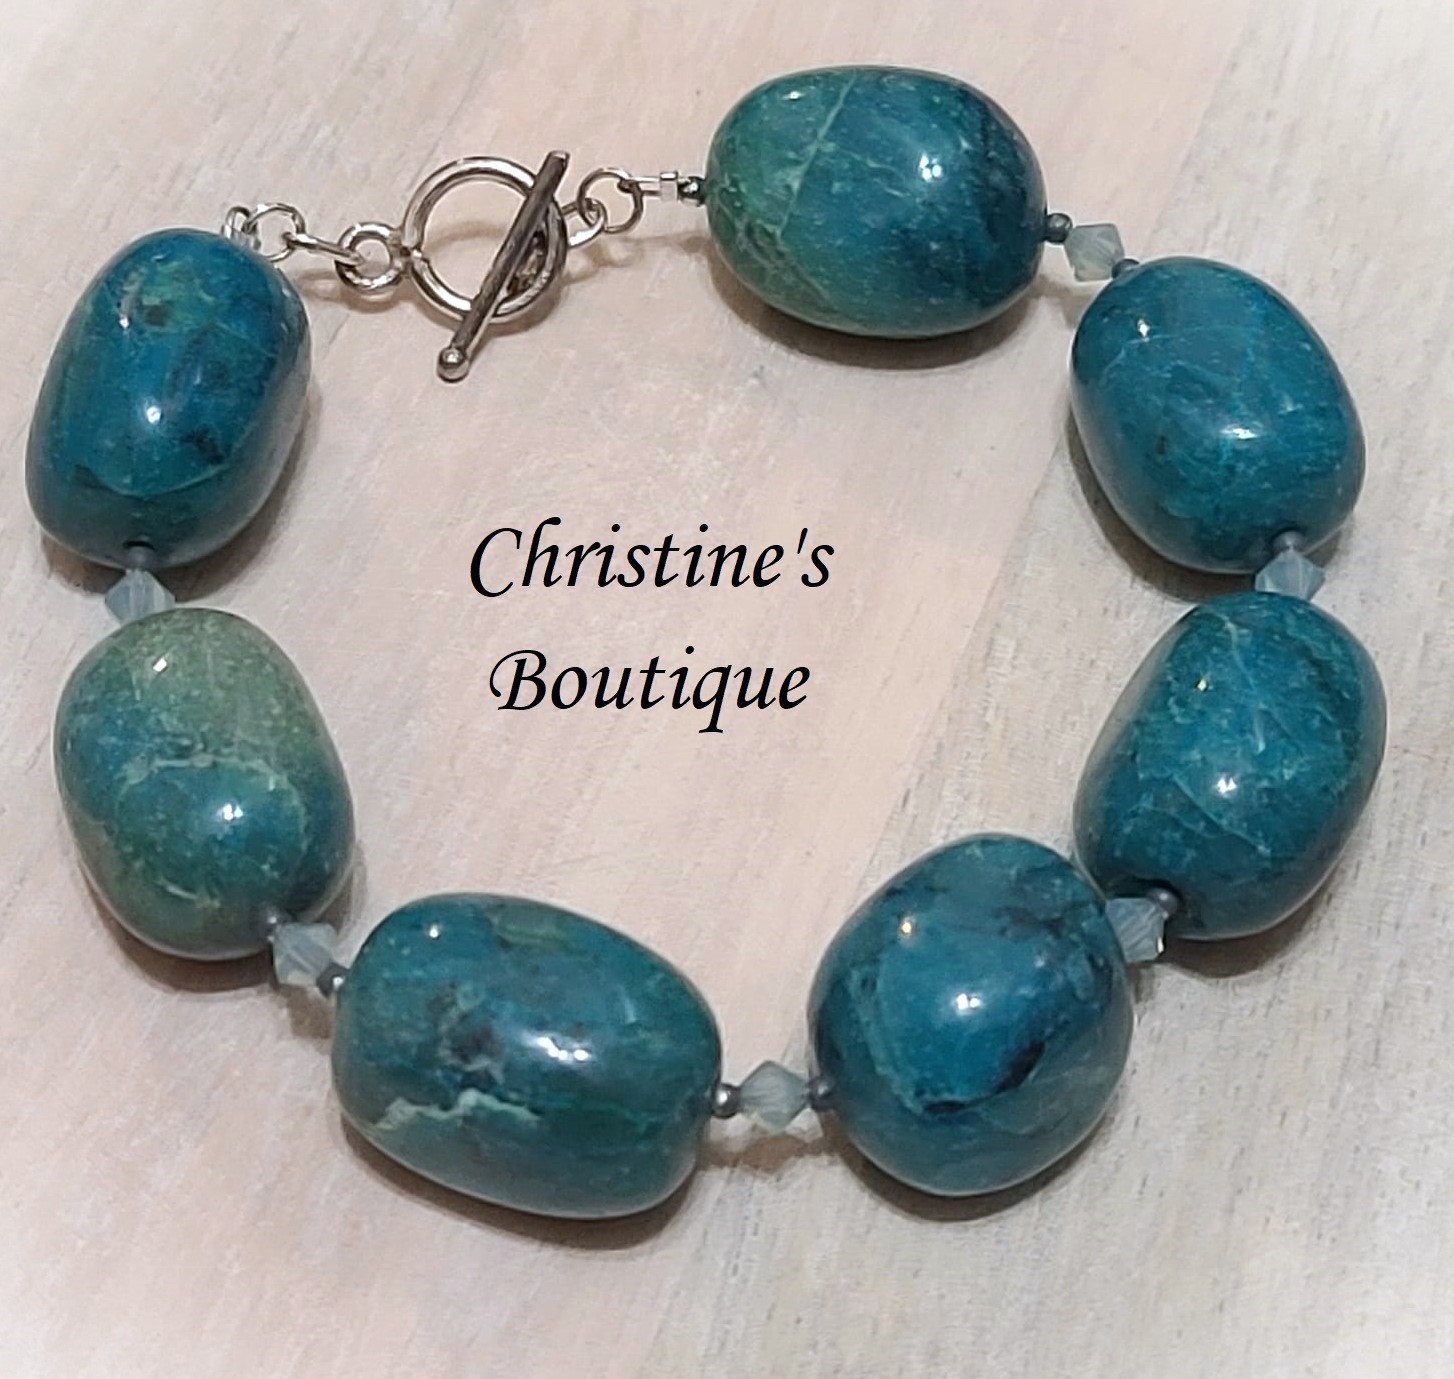 Chrysocolla bracelet with crystal accents, sterling silver